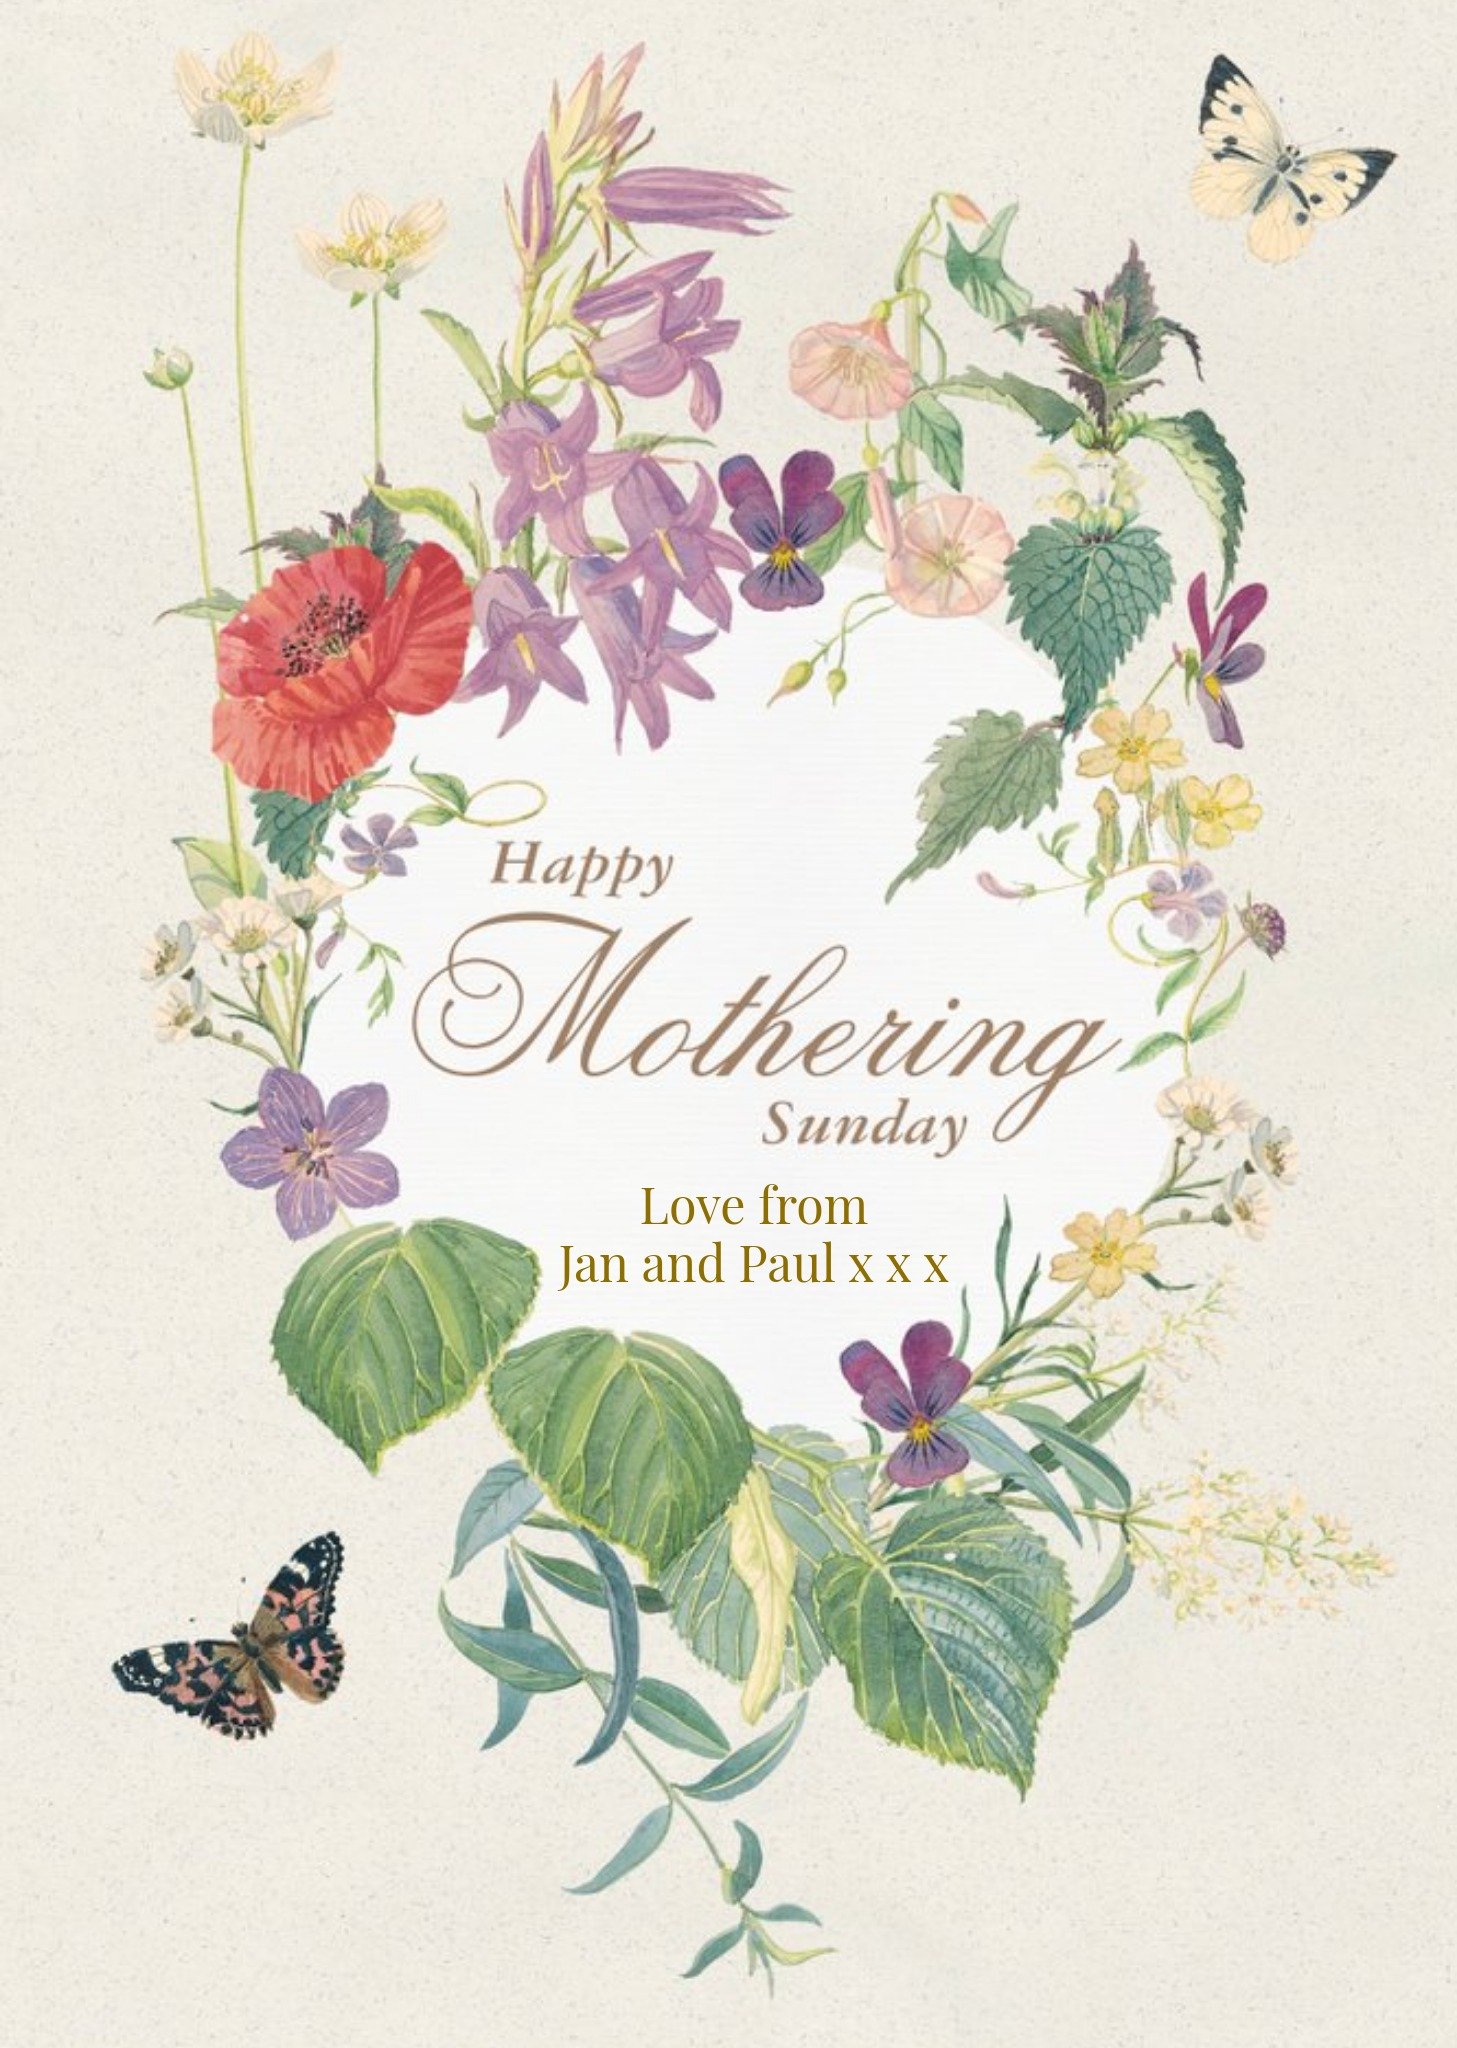 Edwardian Lady Spring Flowers And Butterflies Happy Mothering Sunday Card Ecard